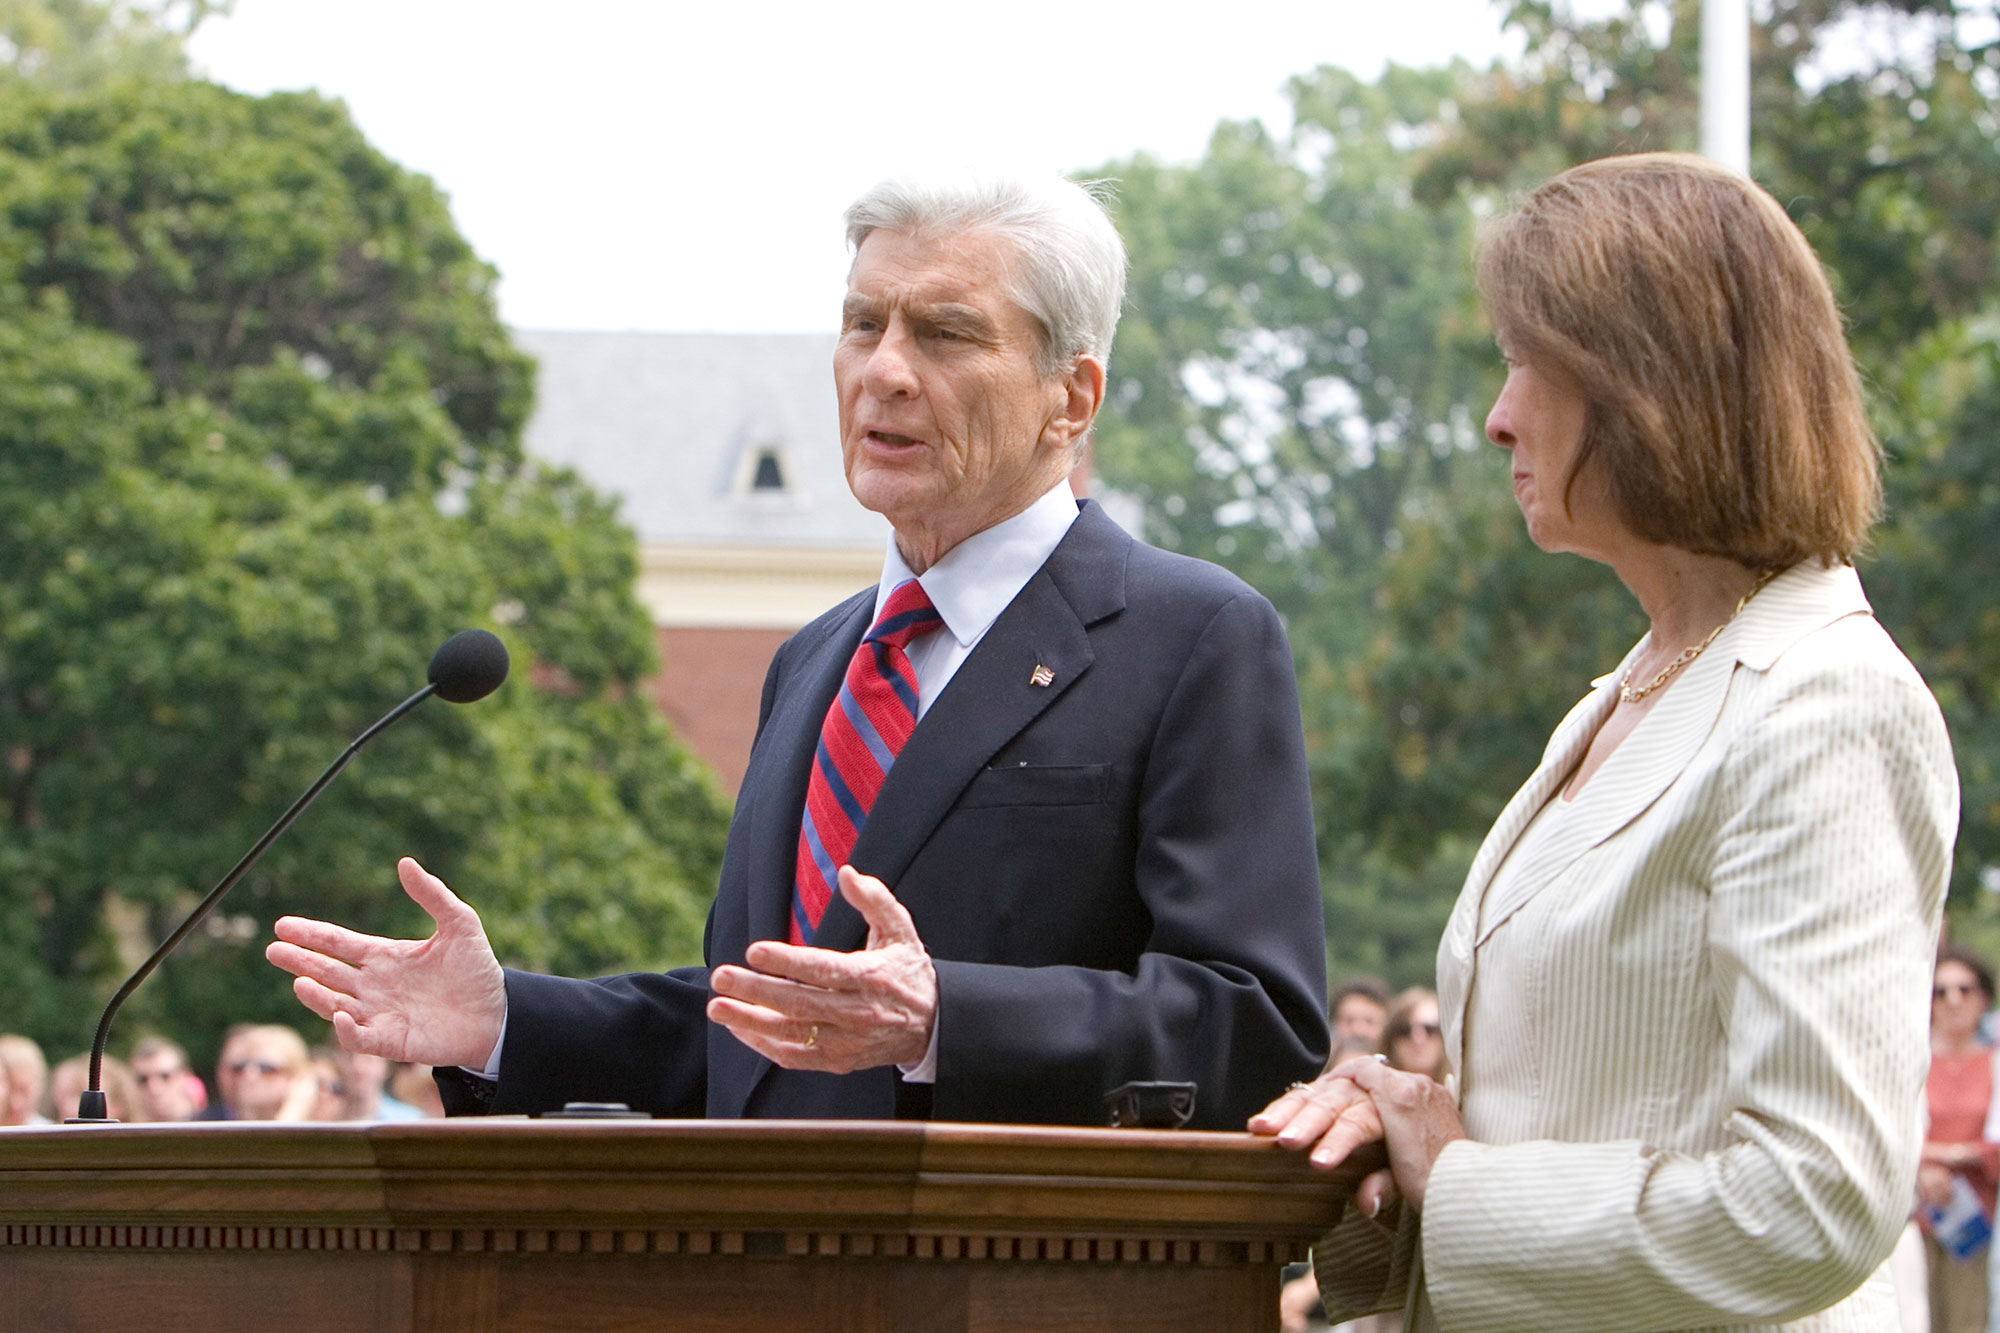 Sen. Warner and his wife, Jeanne Vander Myde, in front of the Rotunda in 2007 as he announced his plans to retire from the Senate in 2009. 